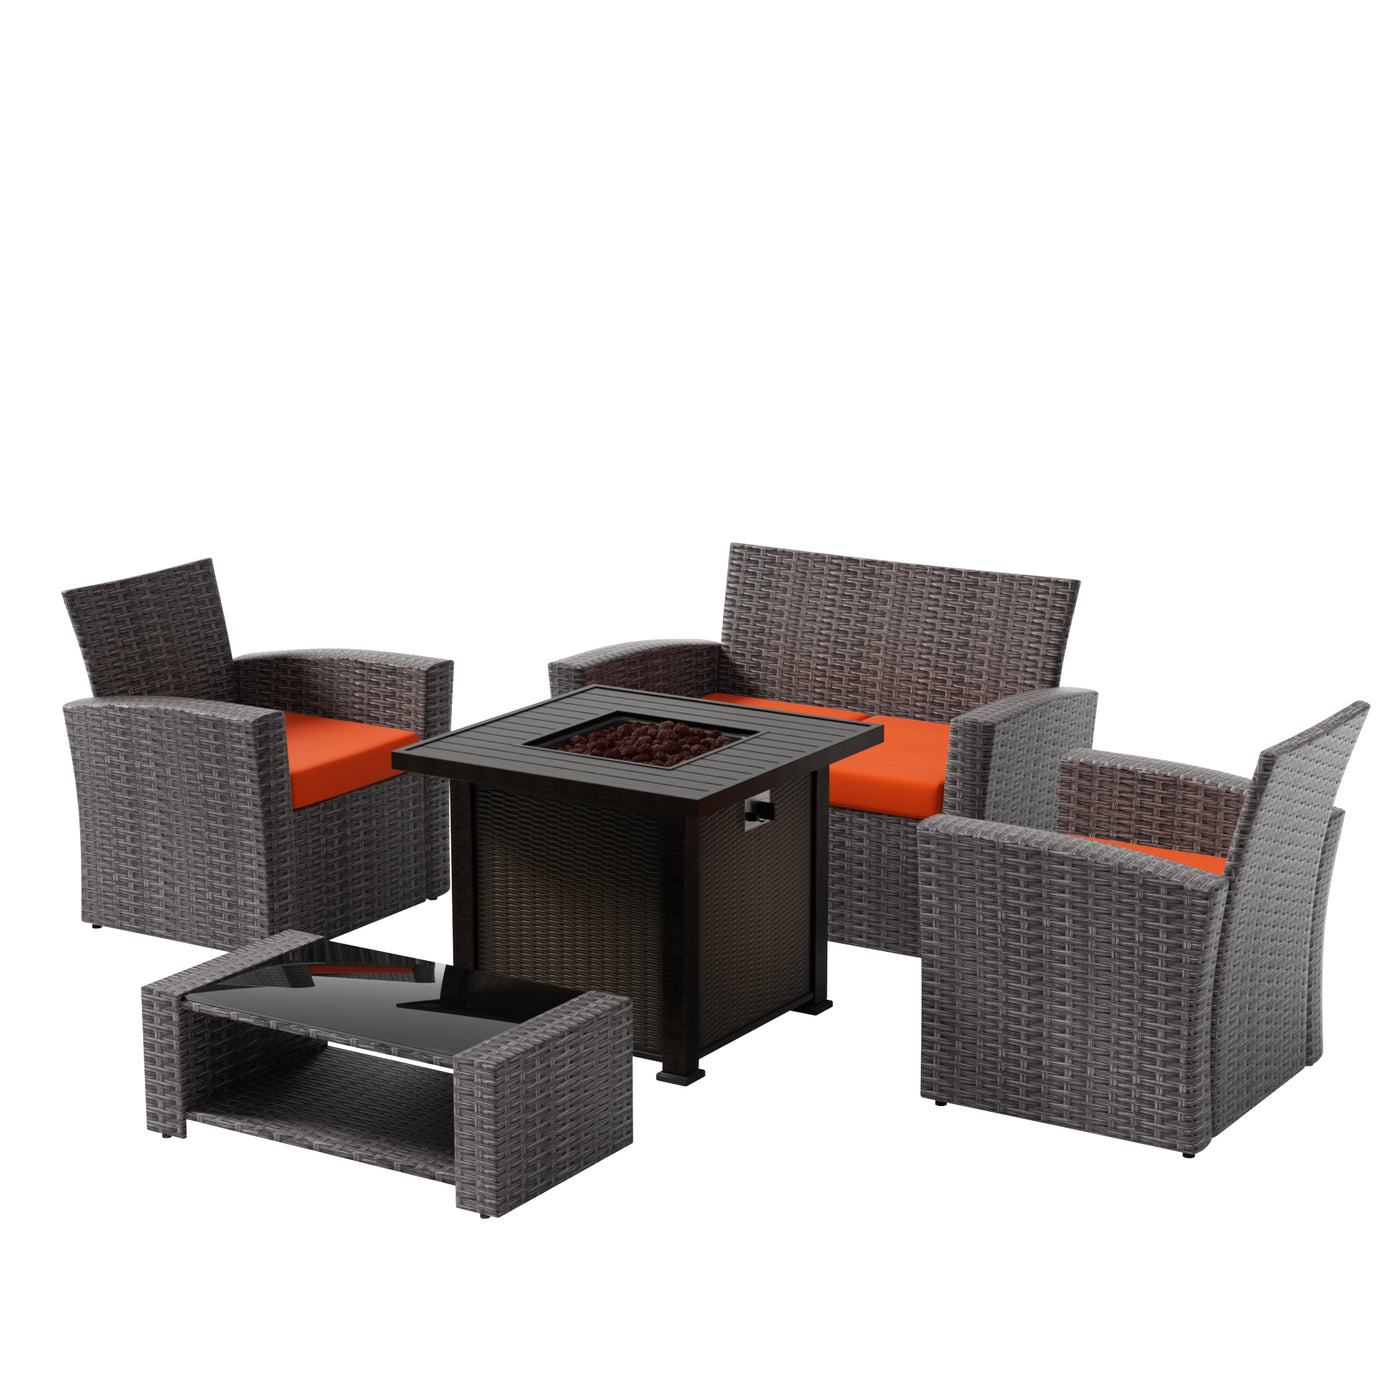 Coastal 4-Piece Gray Outdoor Patio Conversation Sofa Set with Square Fire Pit Table